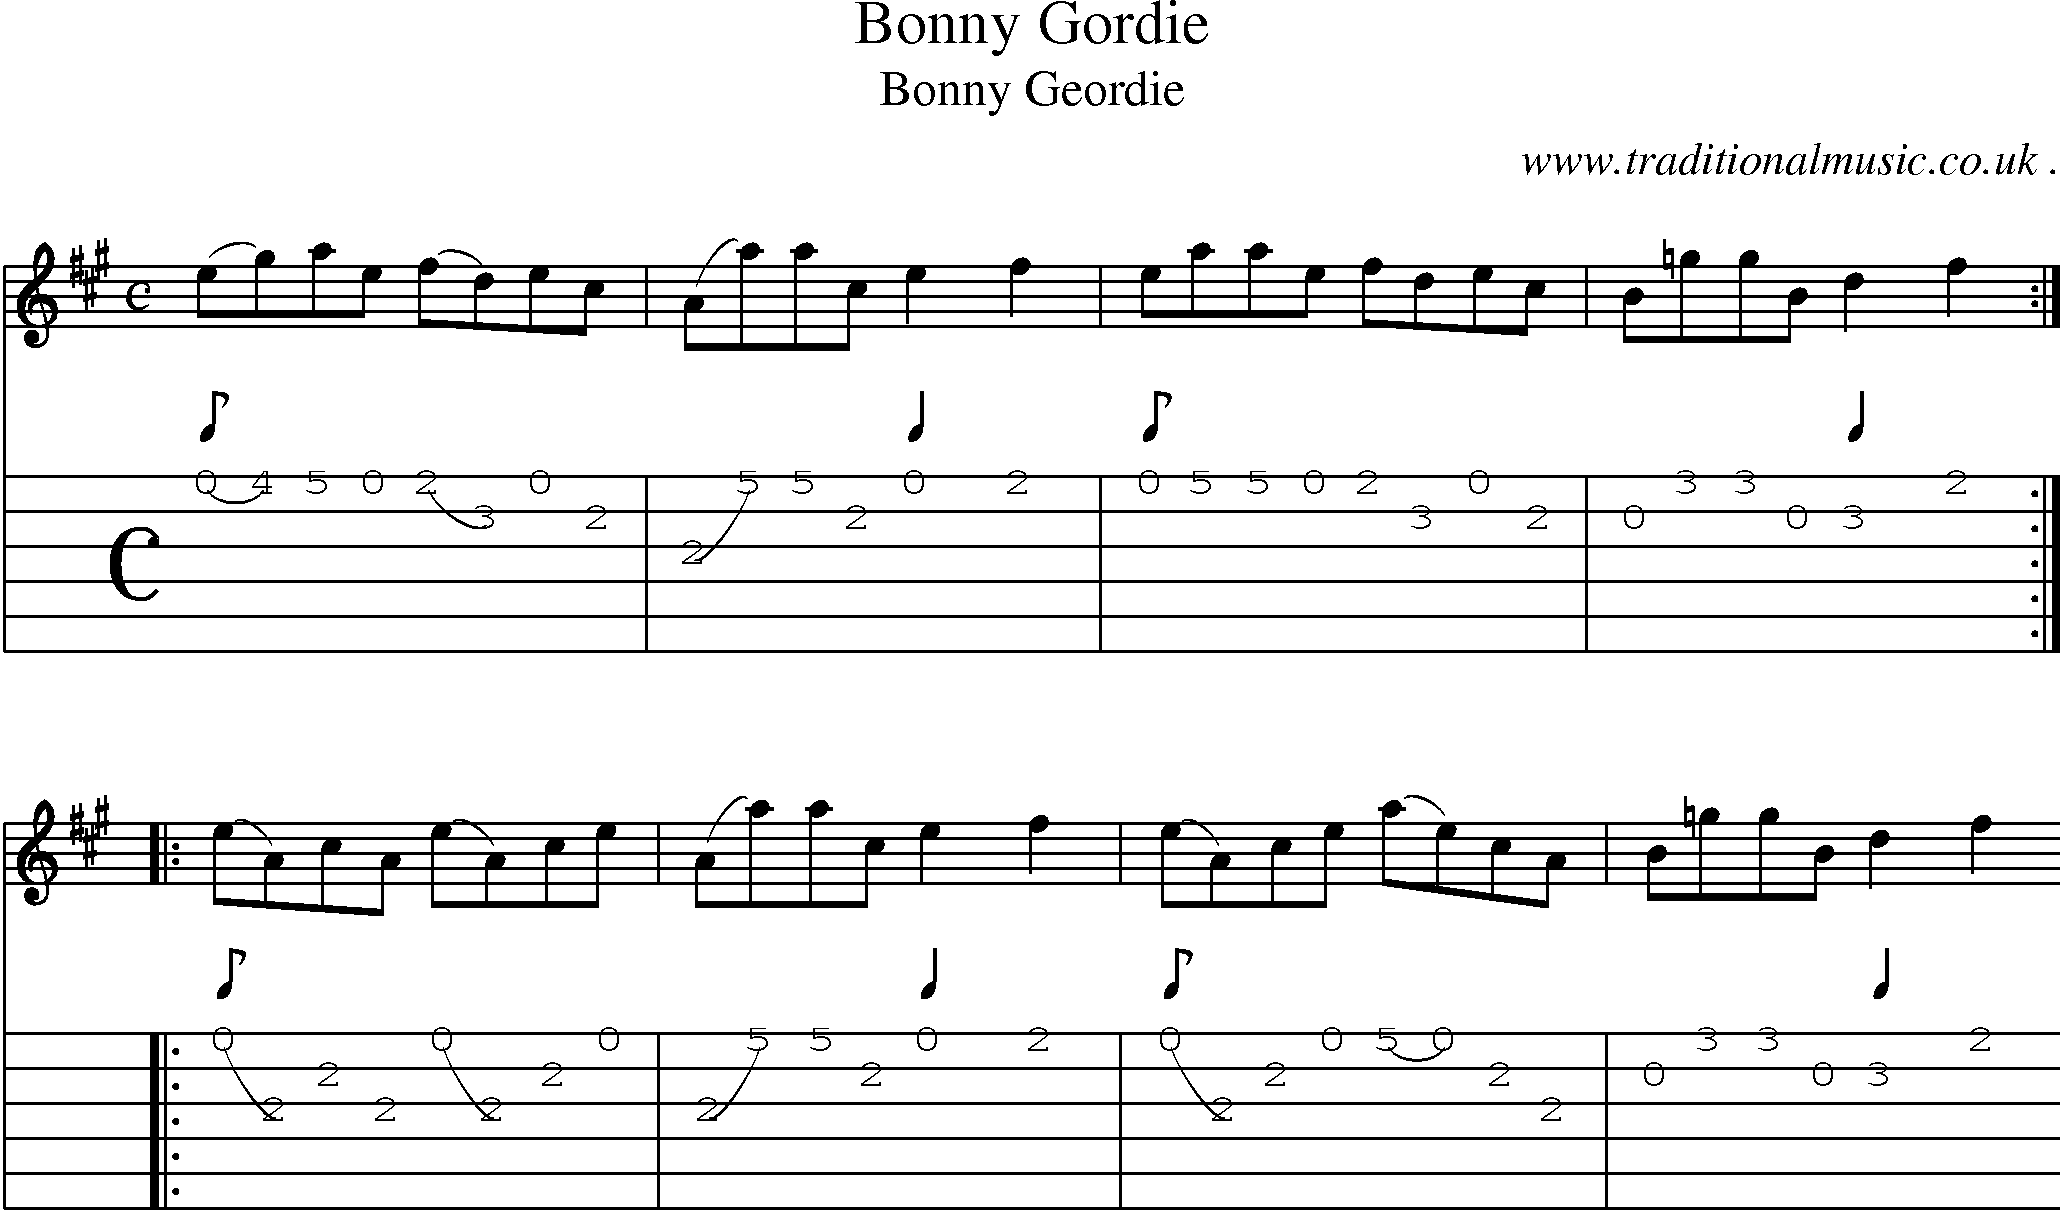 Sheet-Music and Guitar Tabs for Bonny Gordie